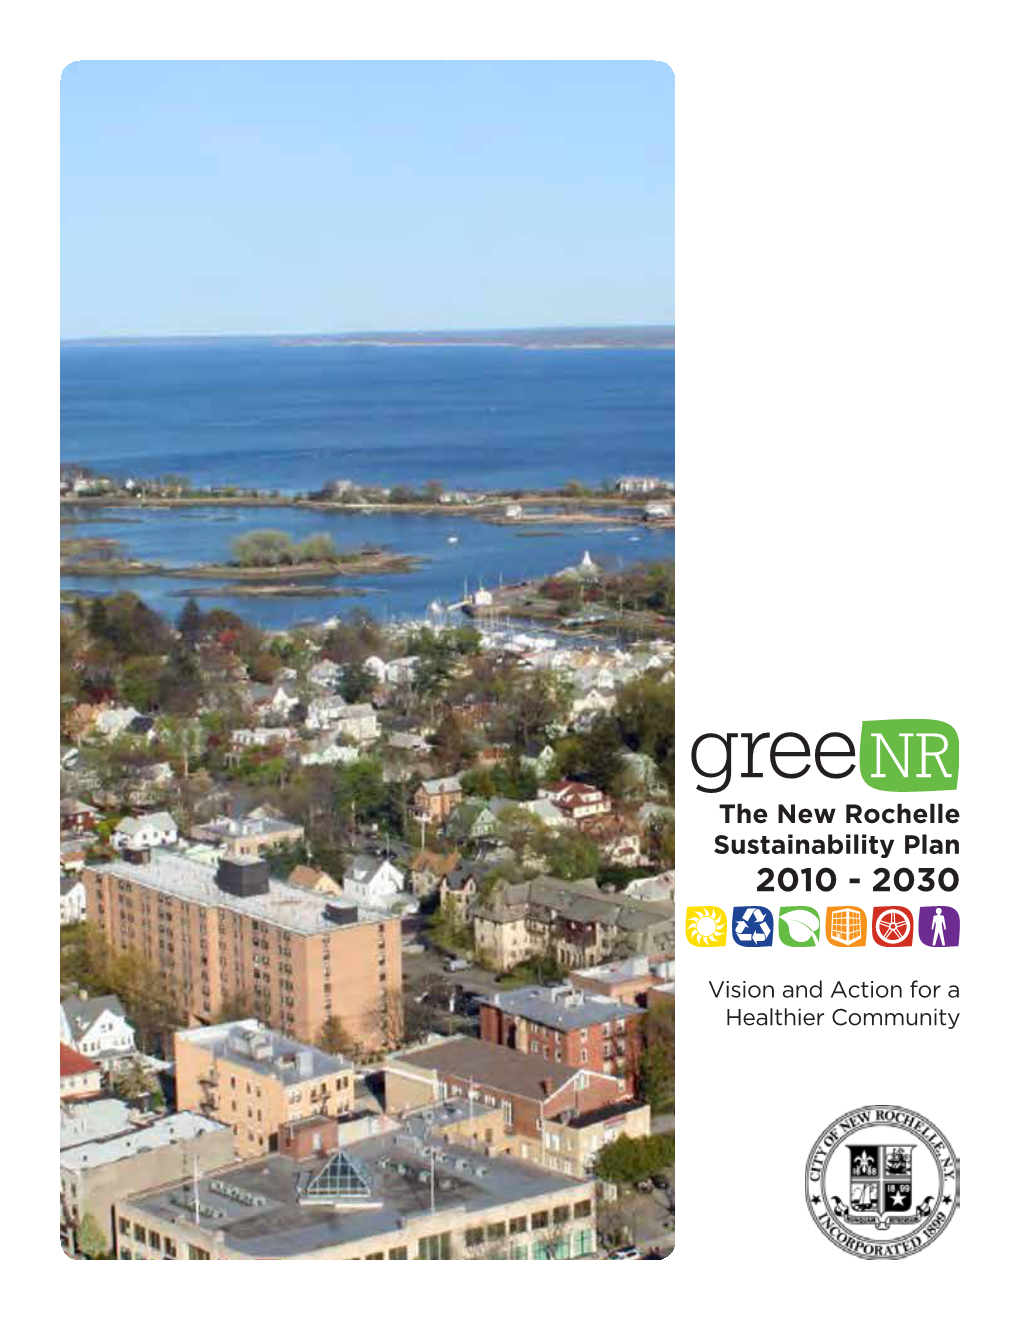 Greenr the New Rochelle Sustainability Plan 2010-2030